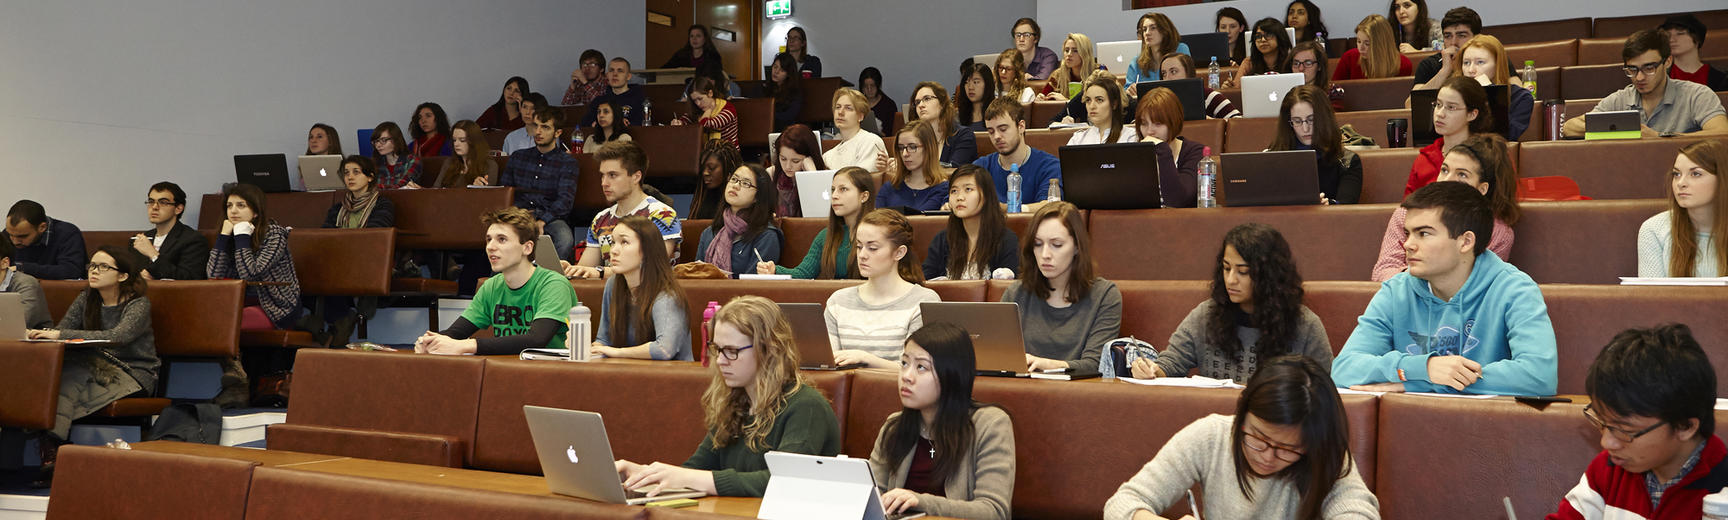 Students listening to a lecture at Oxford University